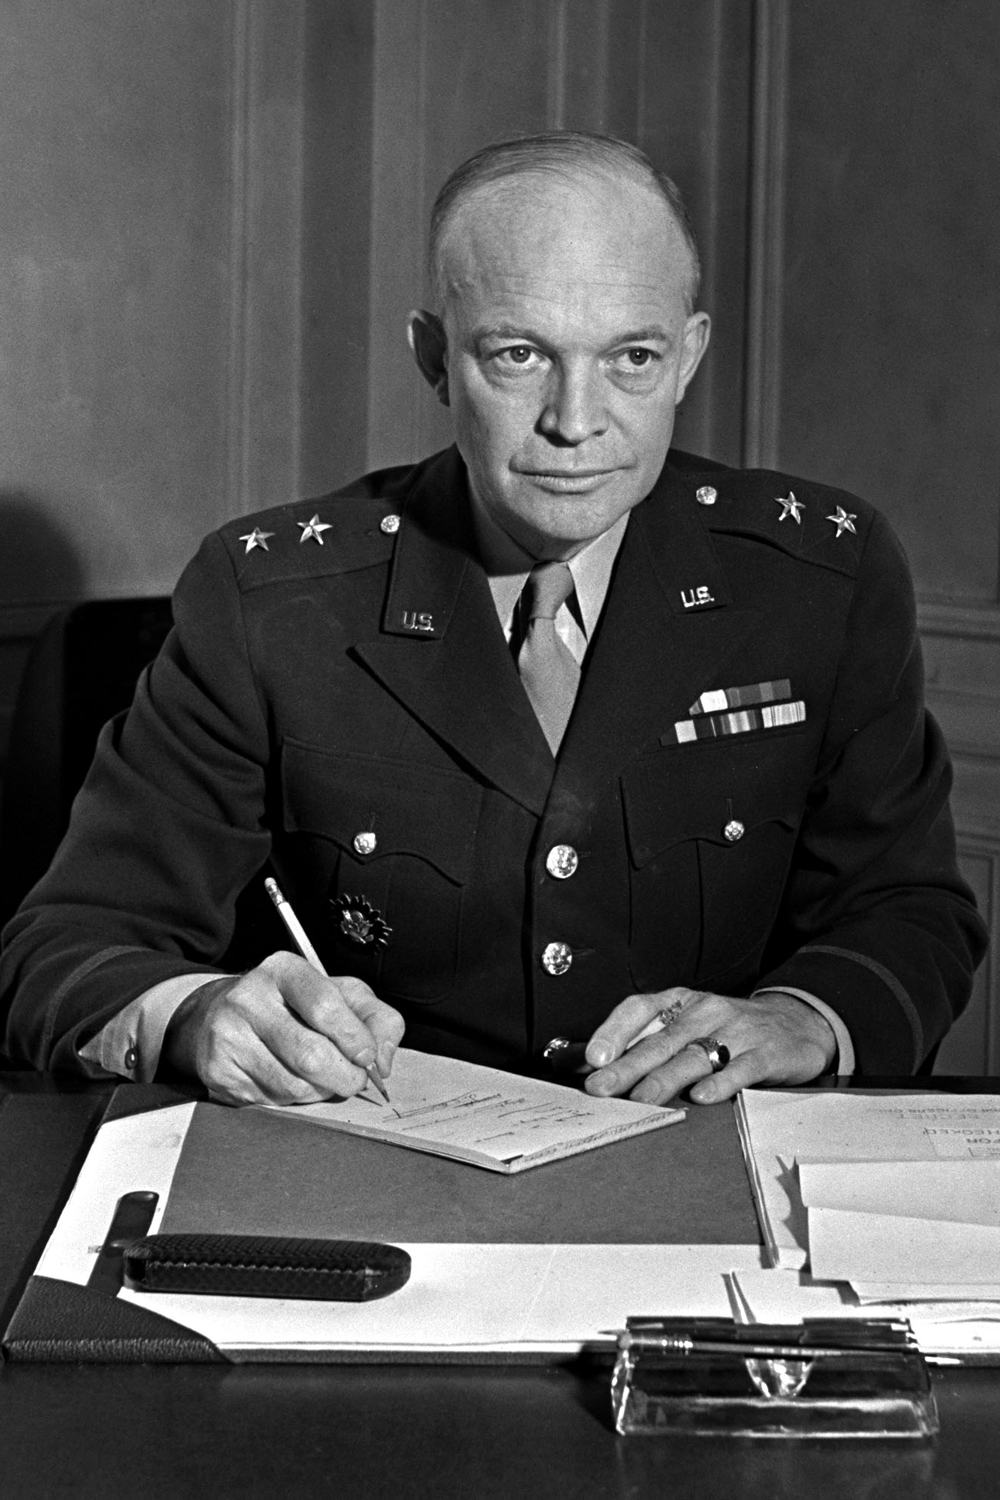 A photo of former President of the United States Dwight D. Eisenhower